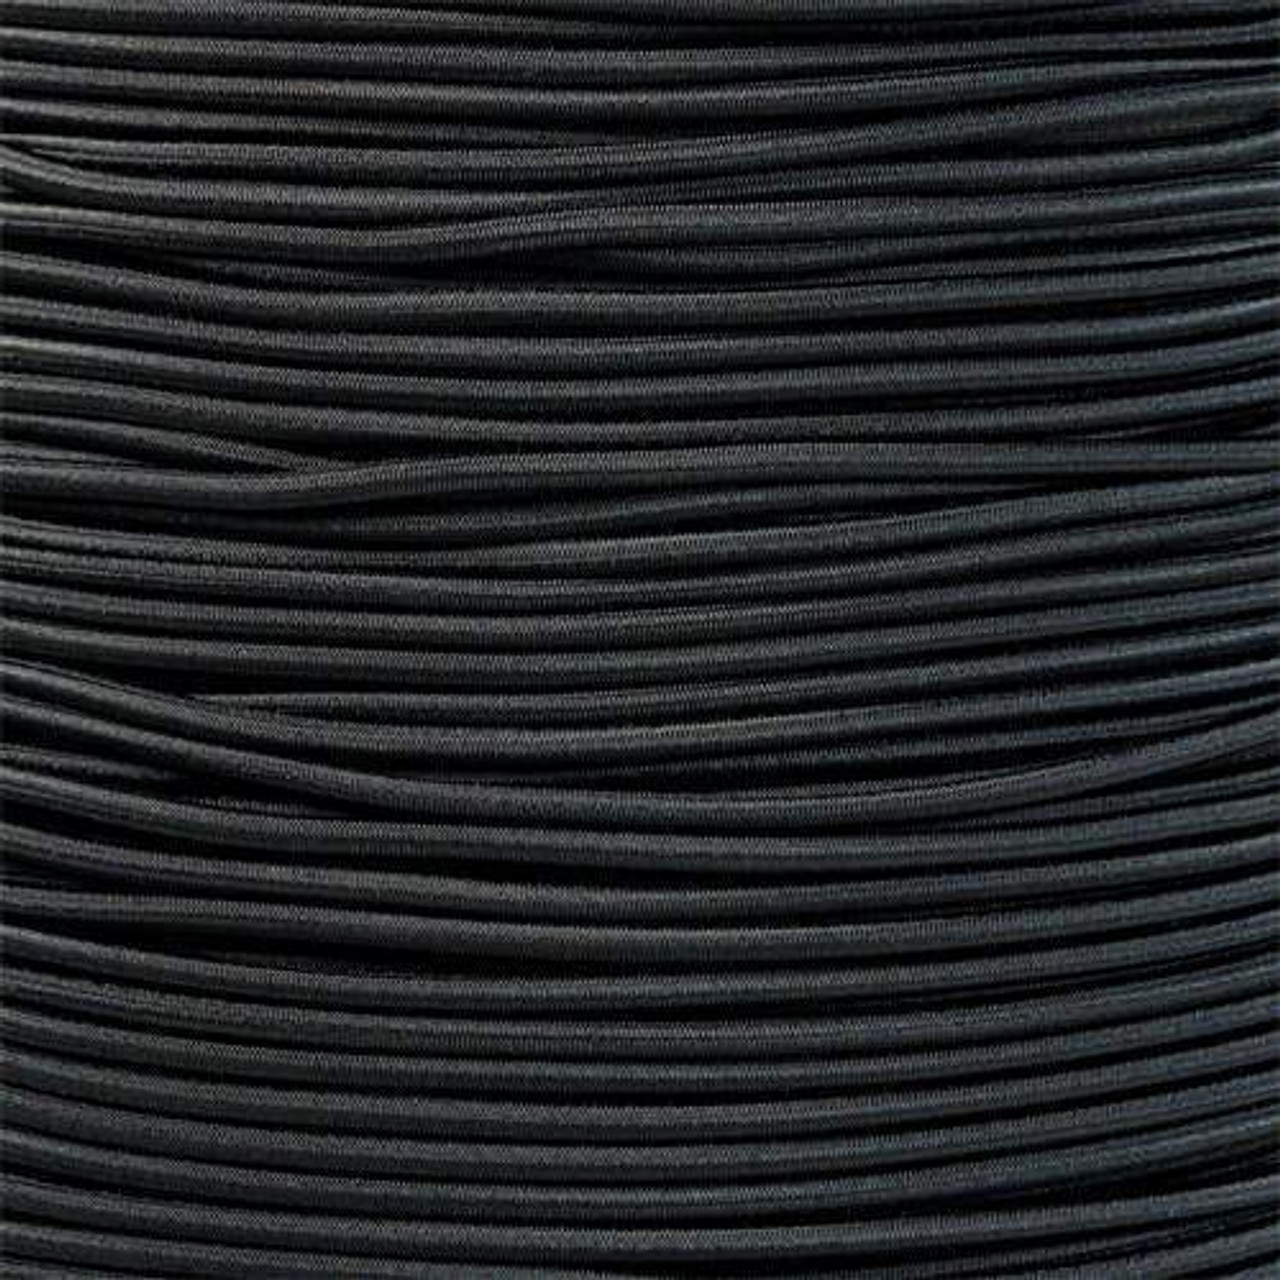 1/2 inch PARACORD PLANET Crafting Stretch String 10 25 50 & 100 Foot Lengths Made in USA Elastic Bungee Nylon Shock Cord 2.5mm 1/32 1/4 1/16 5/8 1/8” 5/16 3/8 3/16 